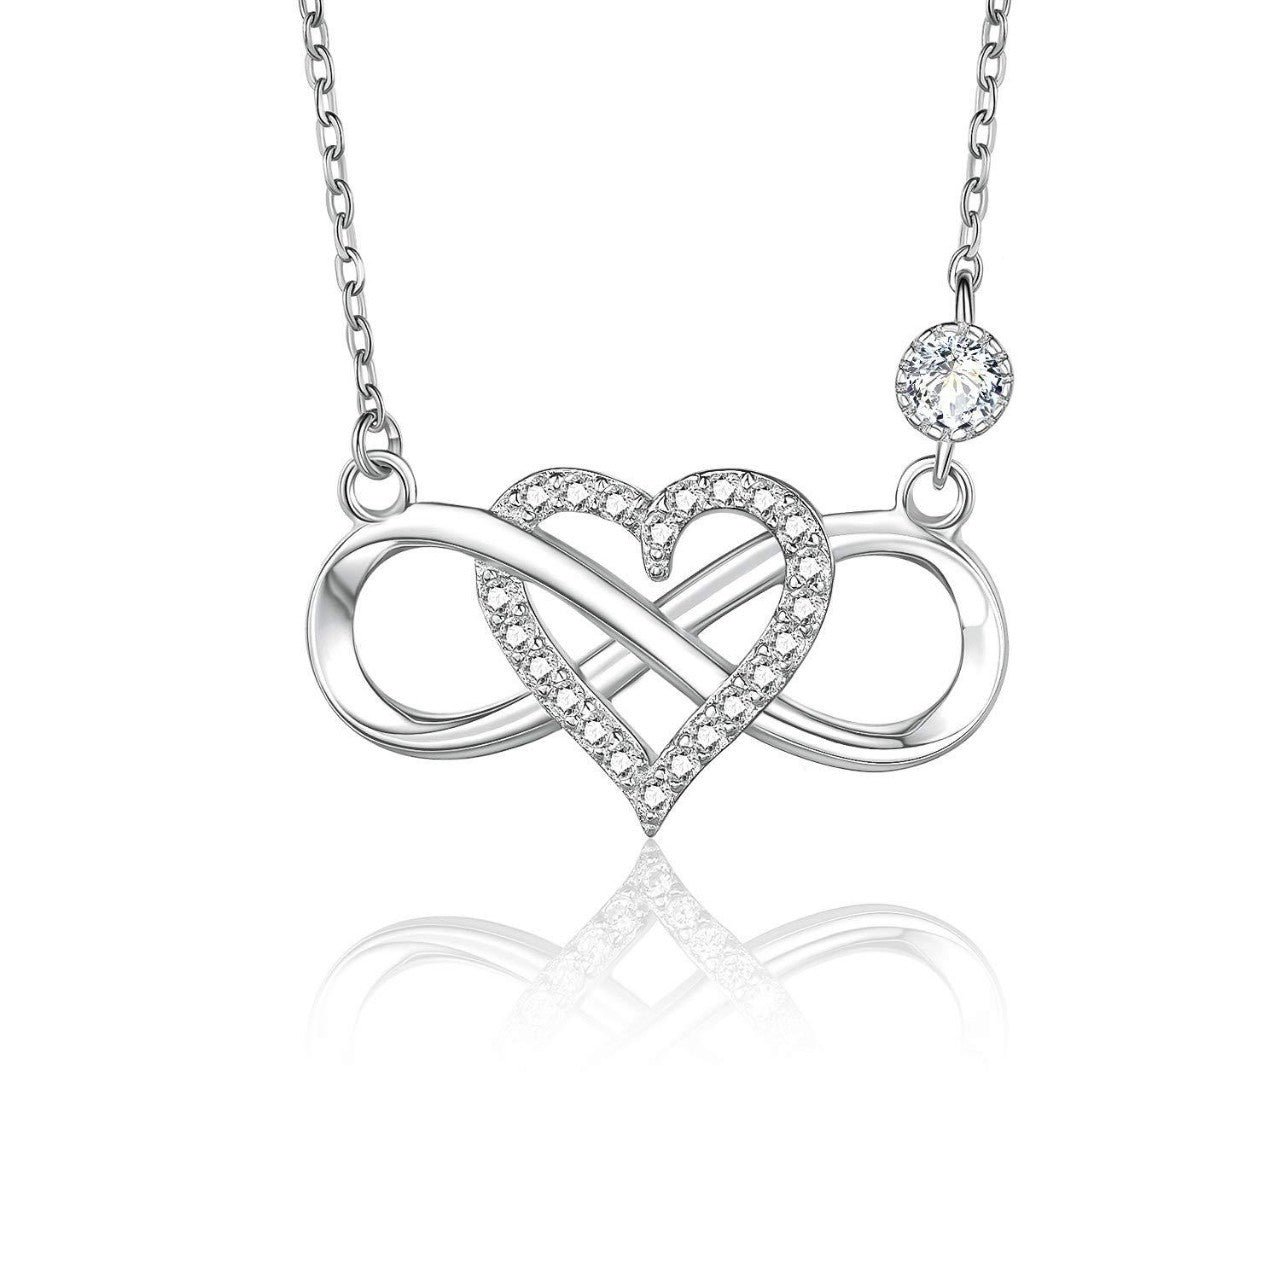 I Love You to Infinity - Necklace for Soulmate/Wife - STM032 - Real Gifts Of Love